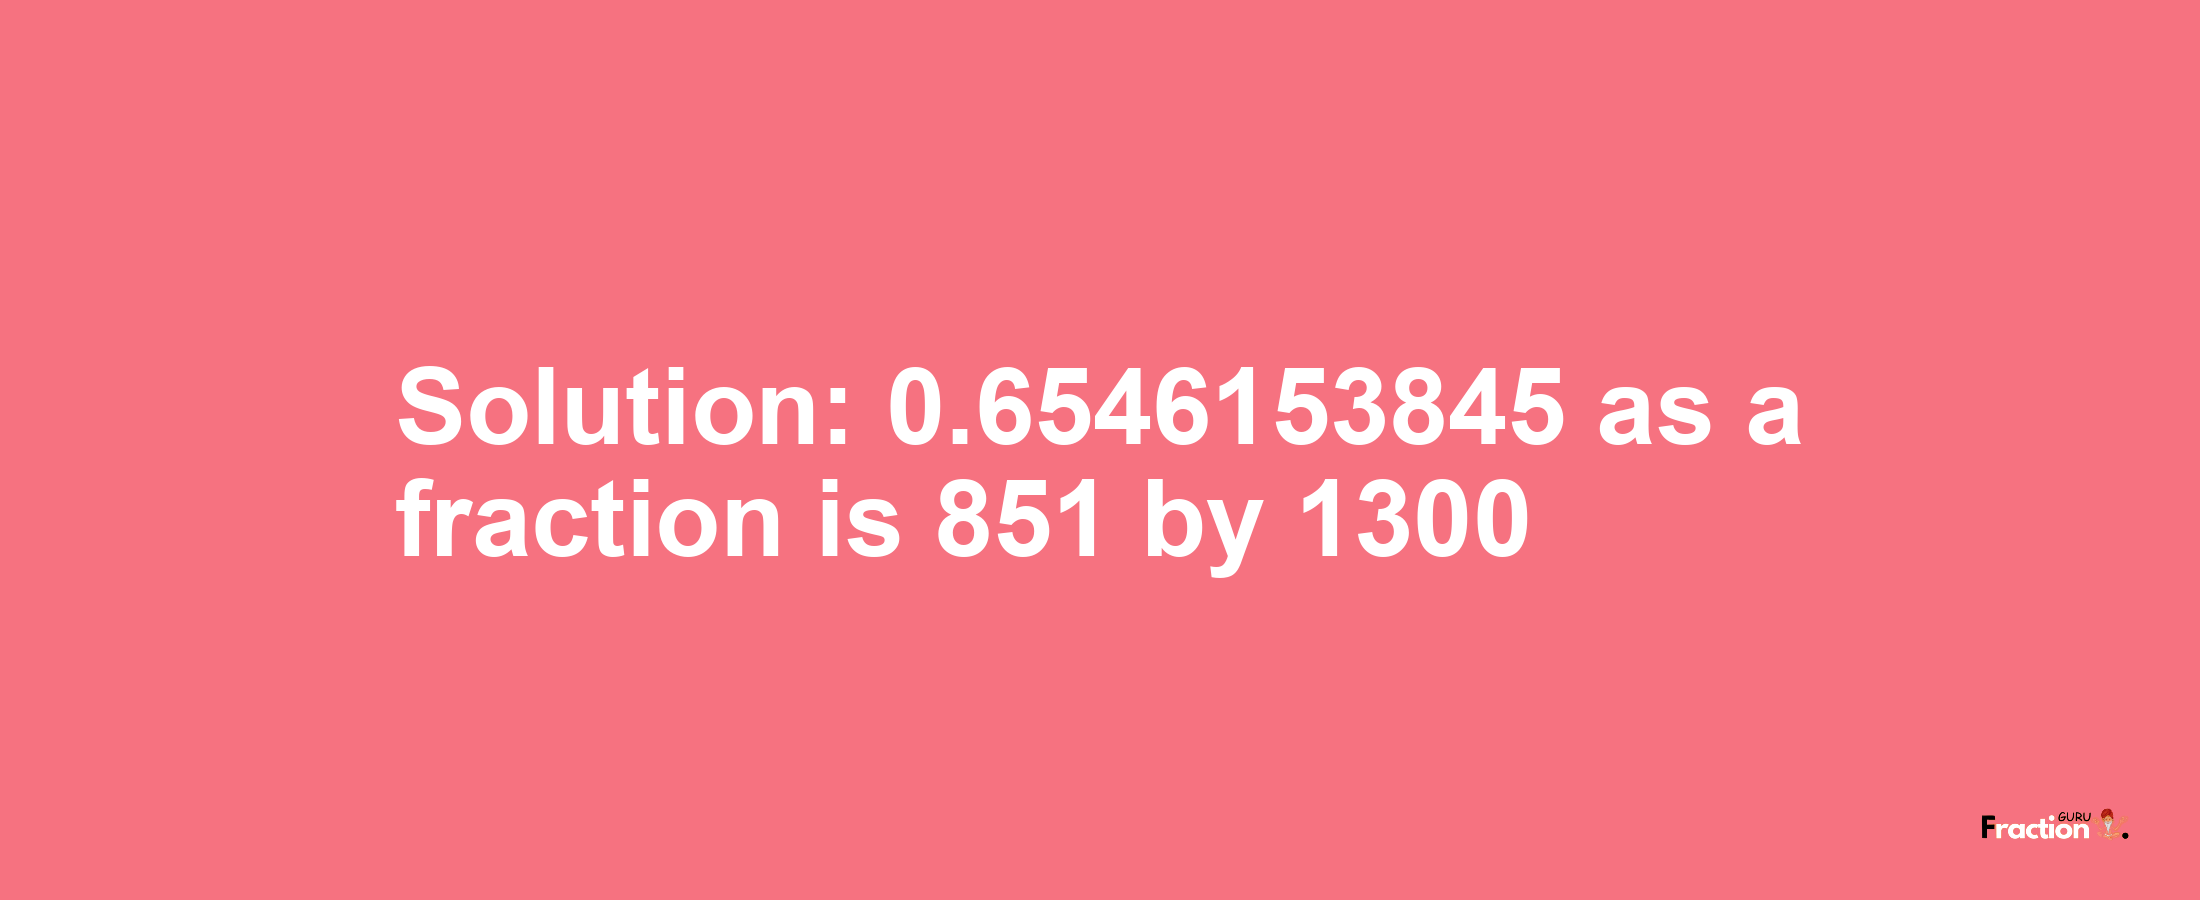 Solution:0.6546153845 as a fraction is 851/1300